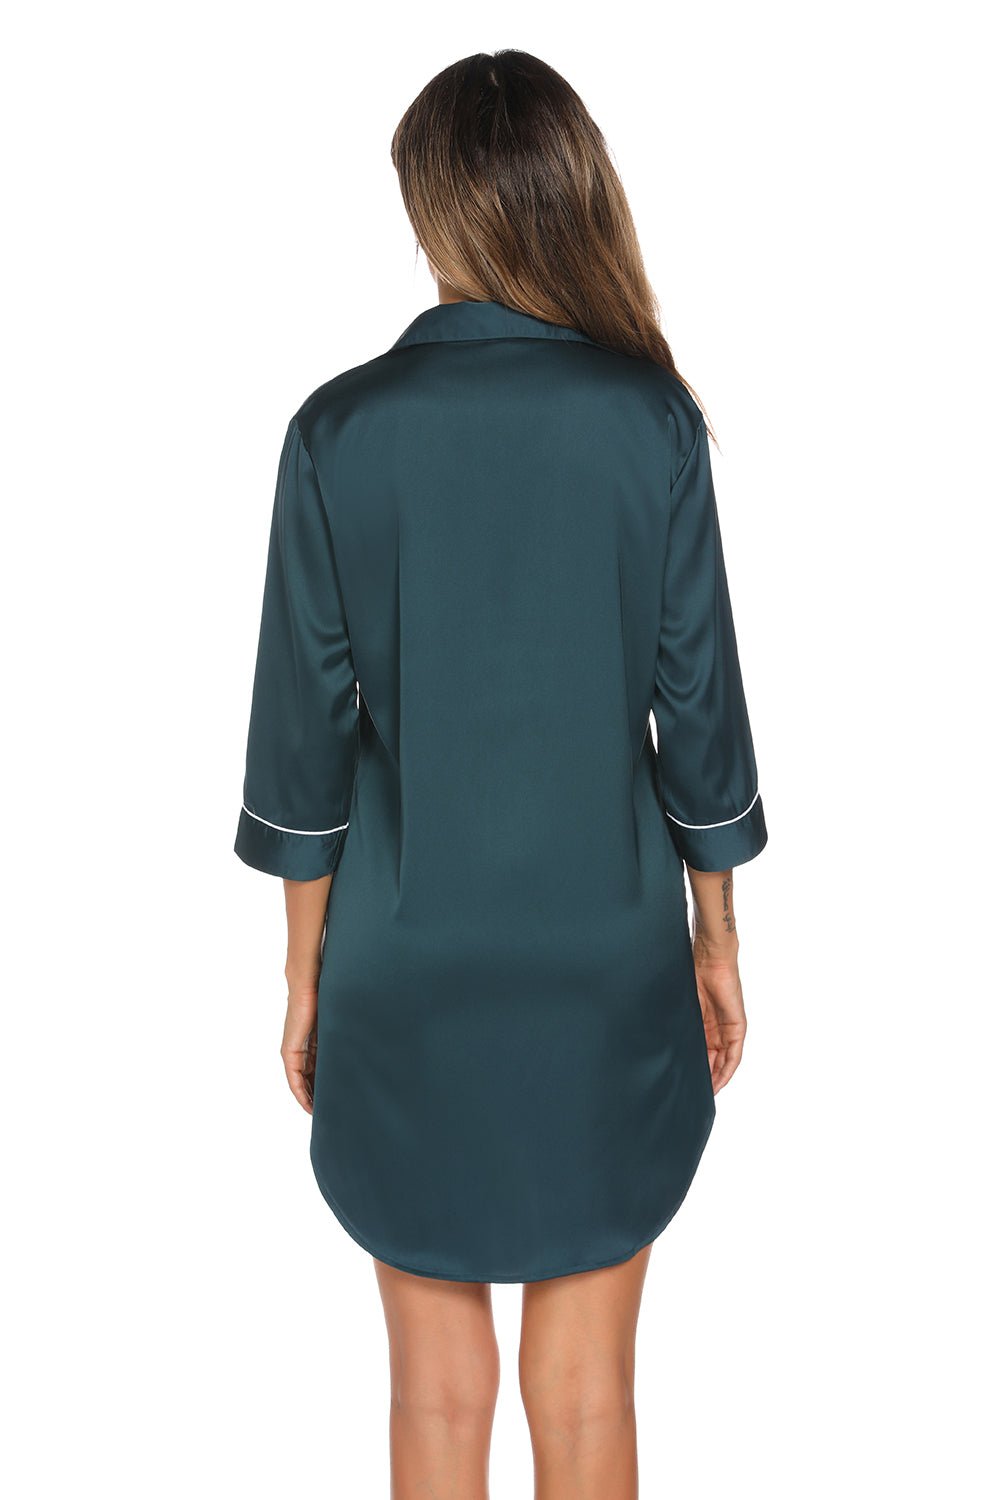 Indulge in luxe comfort with our teal Button Up Collared Night Dress, complete with a chic collar, handy pocket, and breathable fabric.